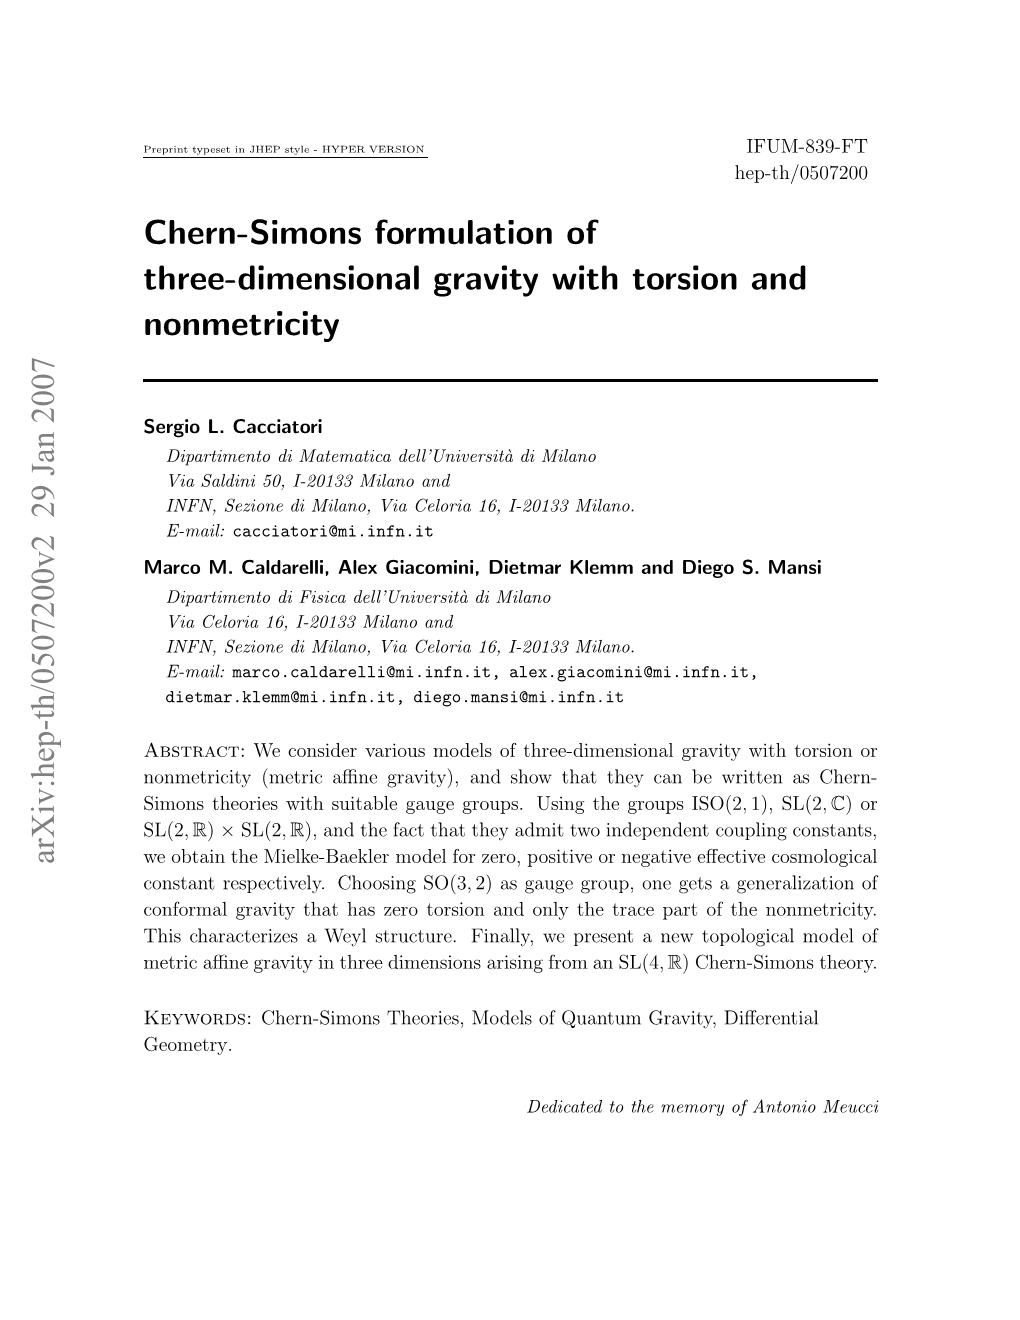 Chern-Simons Formulation of Three-Dimensional Gravity With